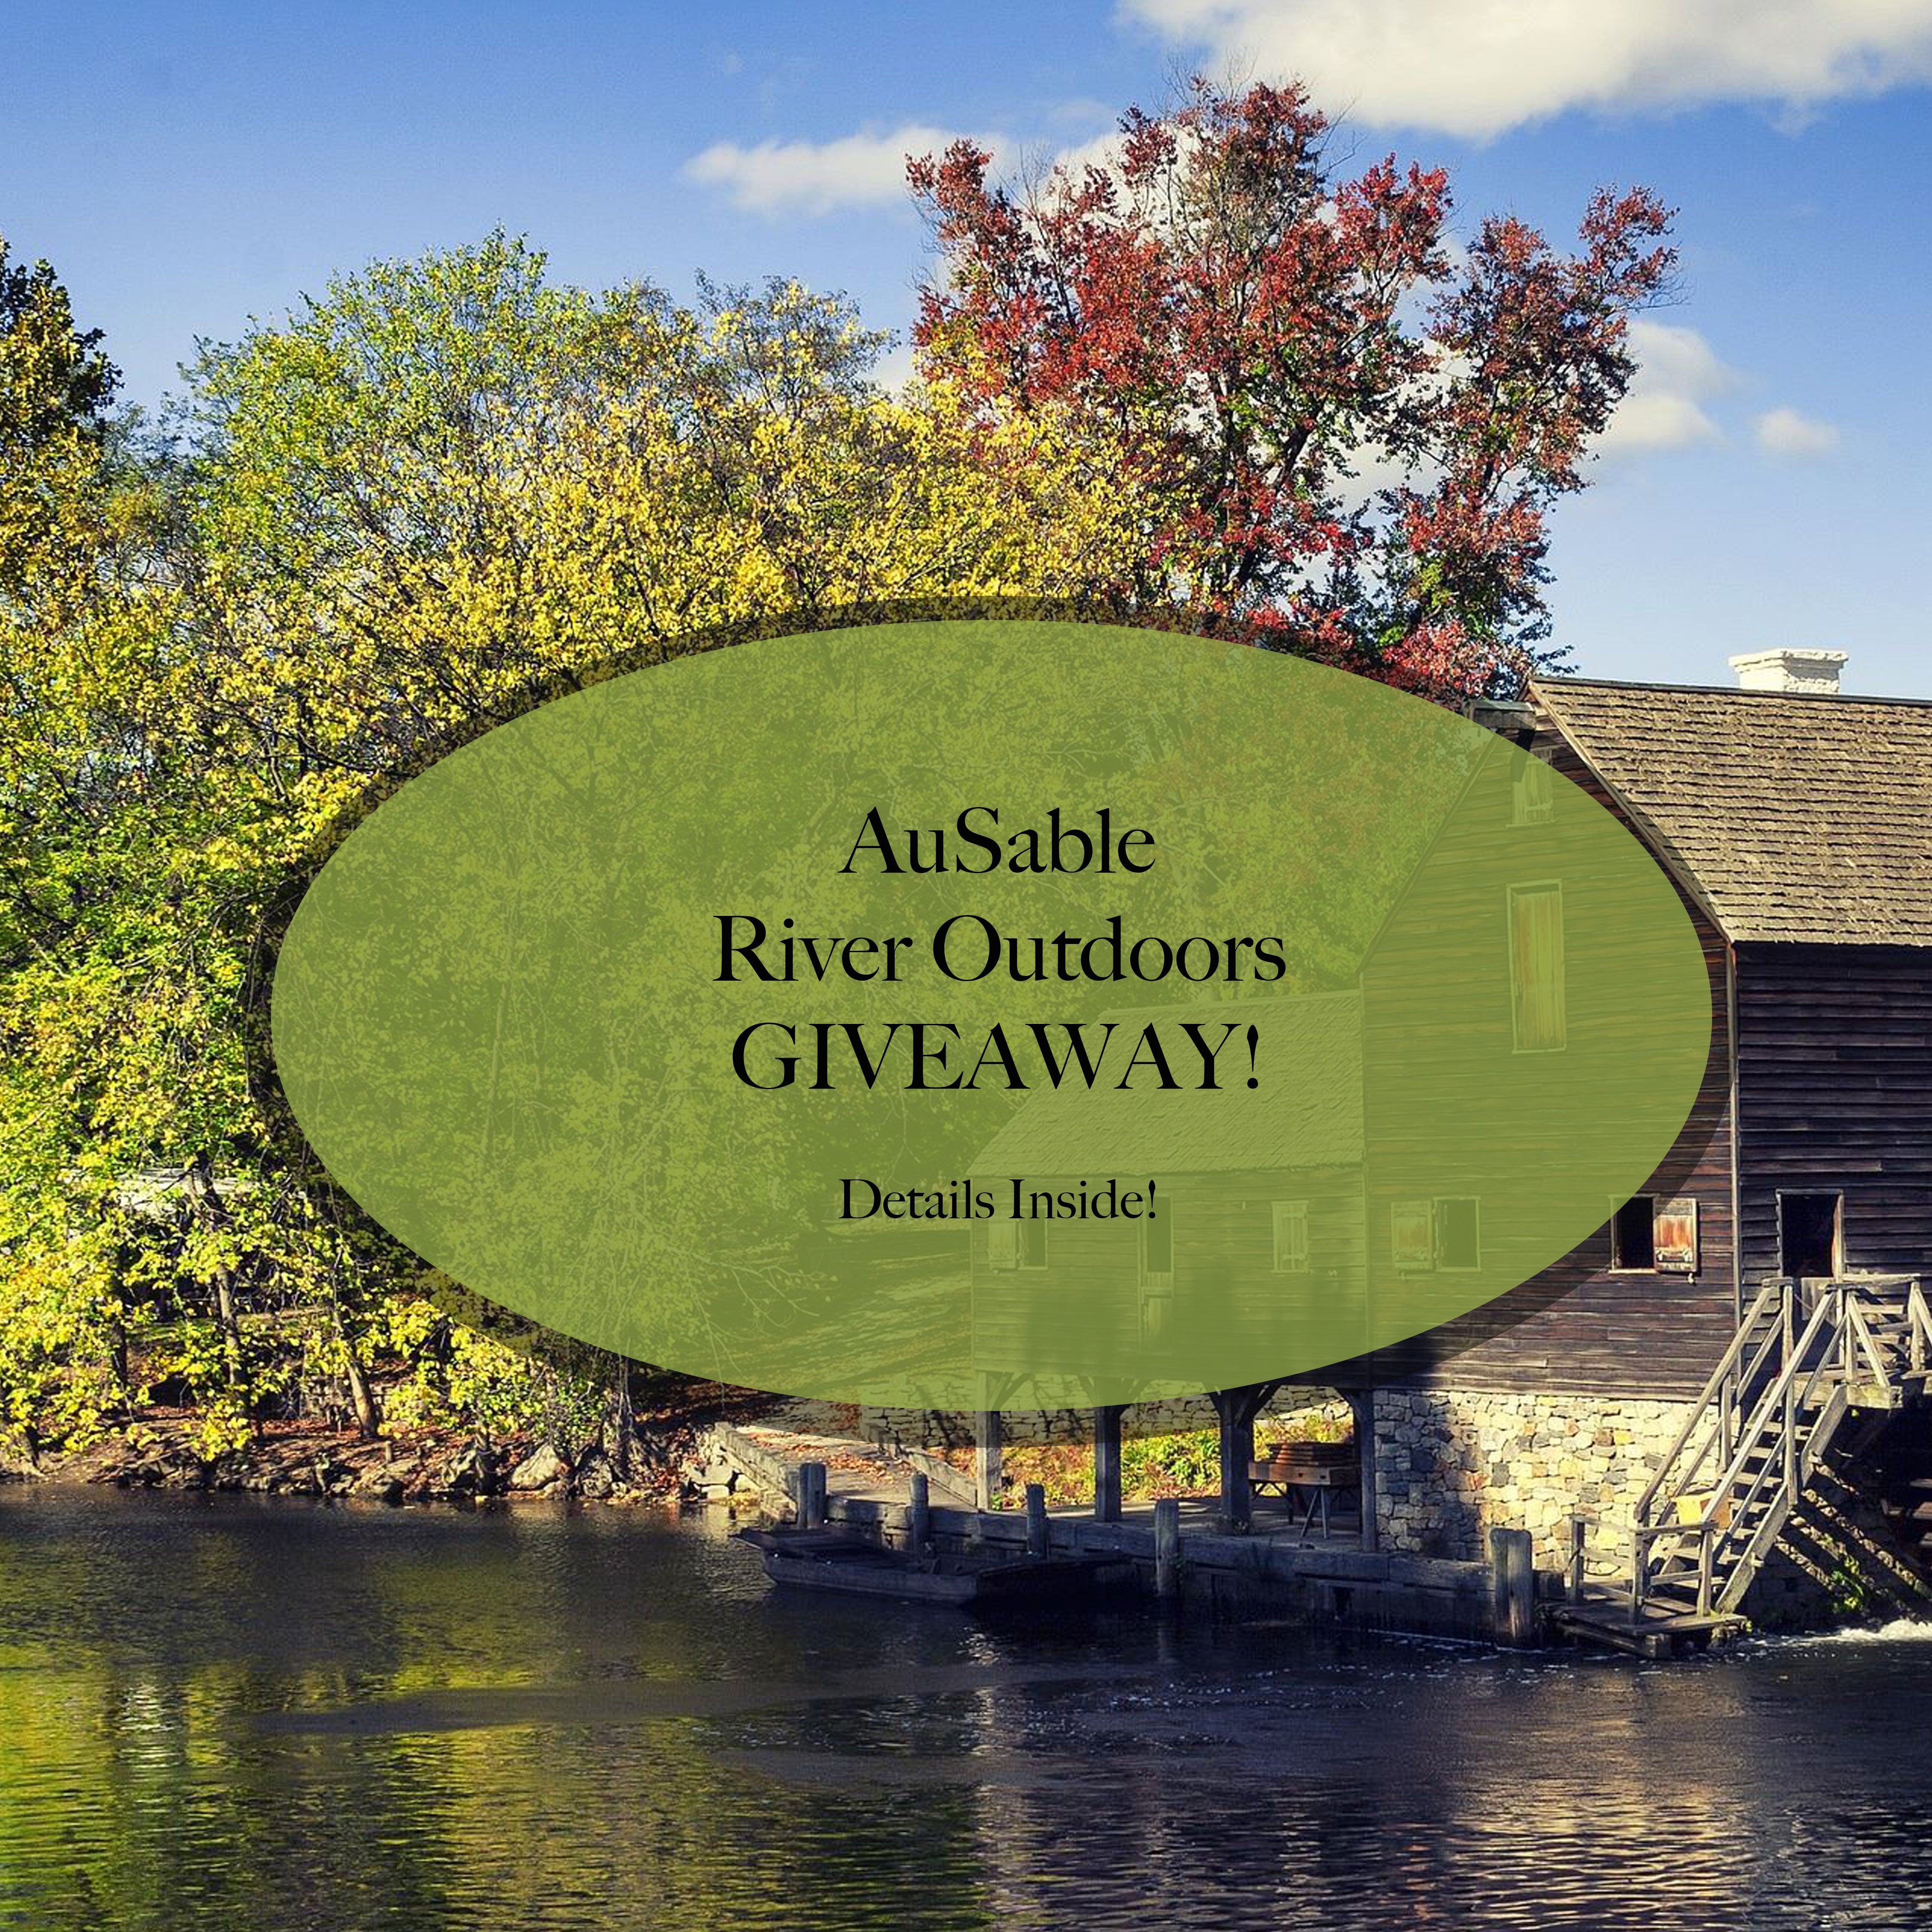 AuSable River Outdoors Knife GIVEAWAY